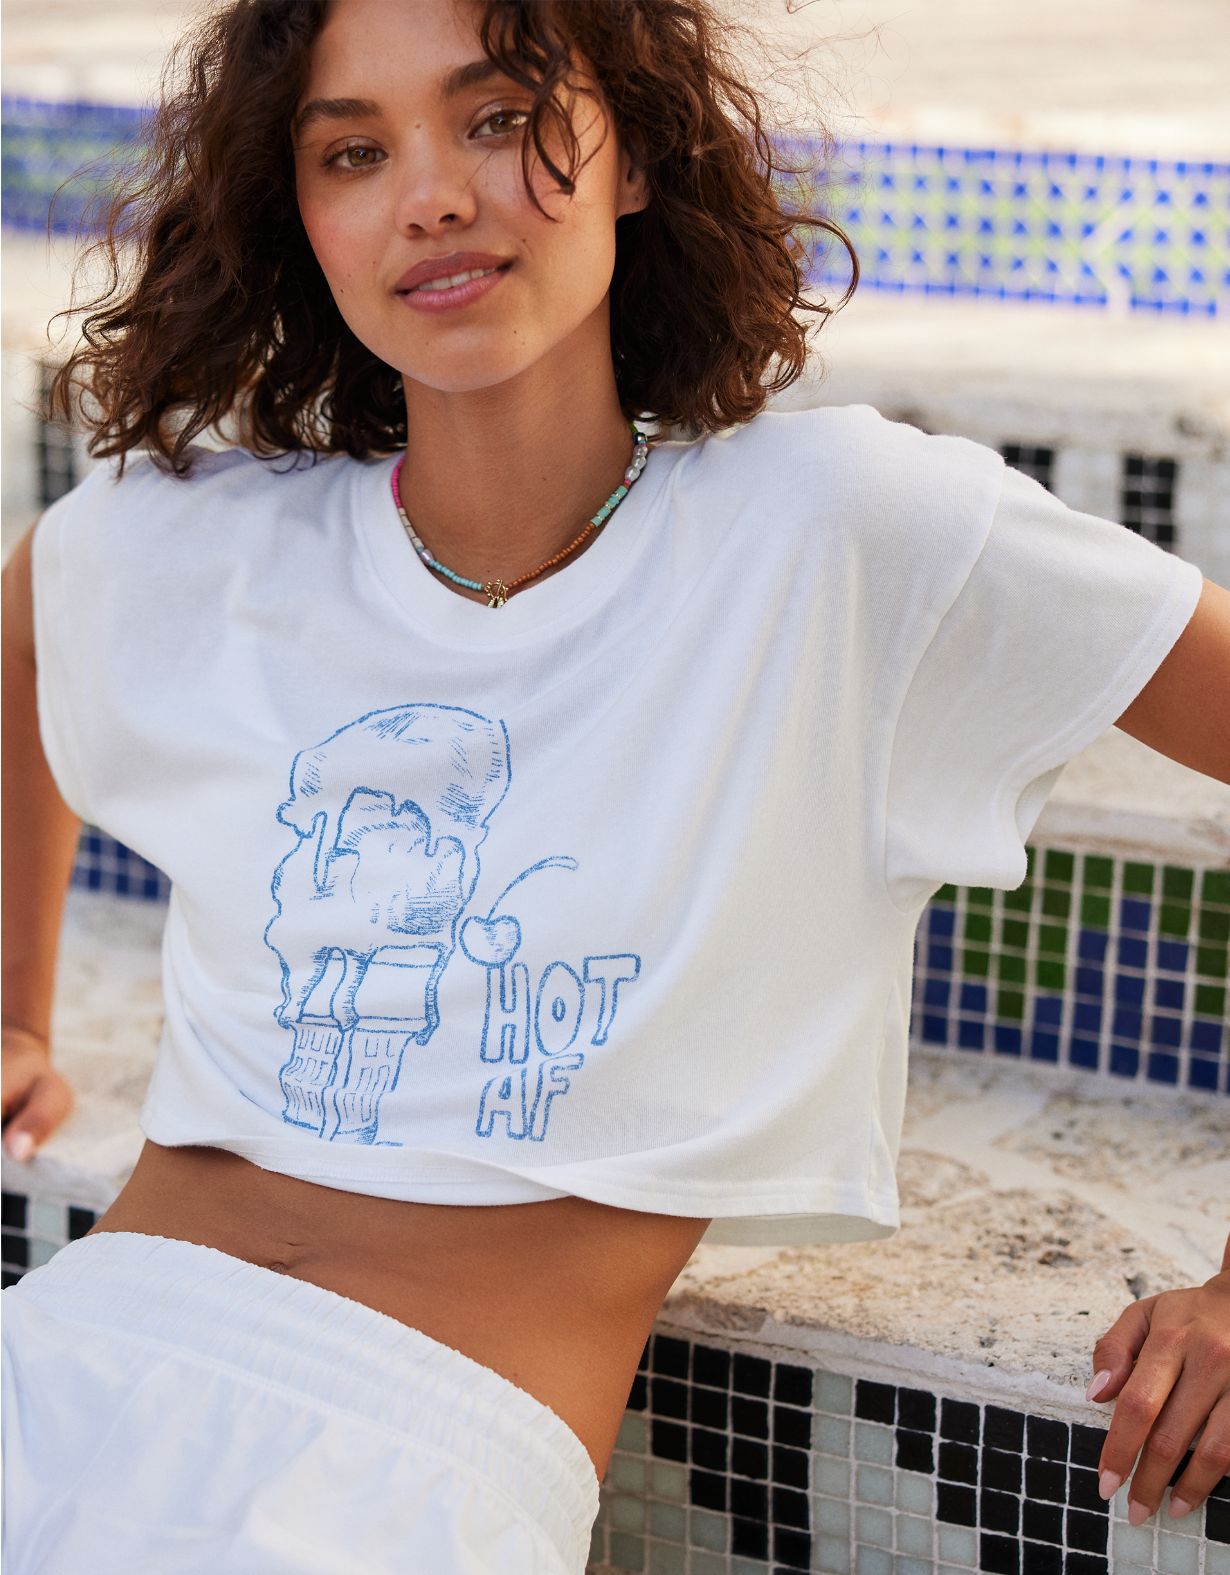 OFFLINE By Aerie T-shirt cropped